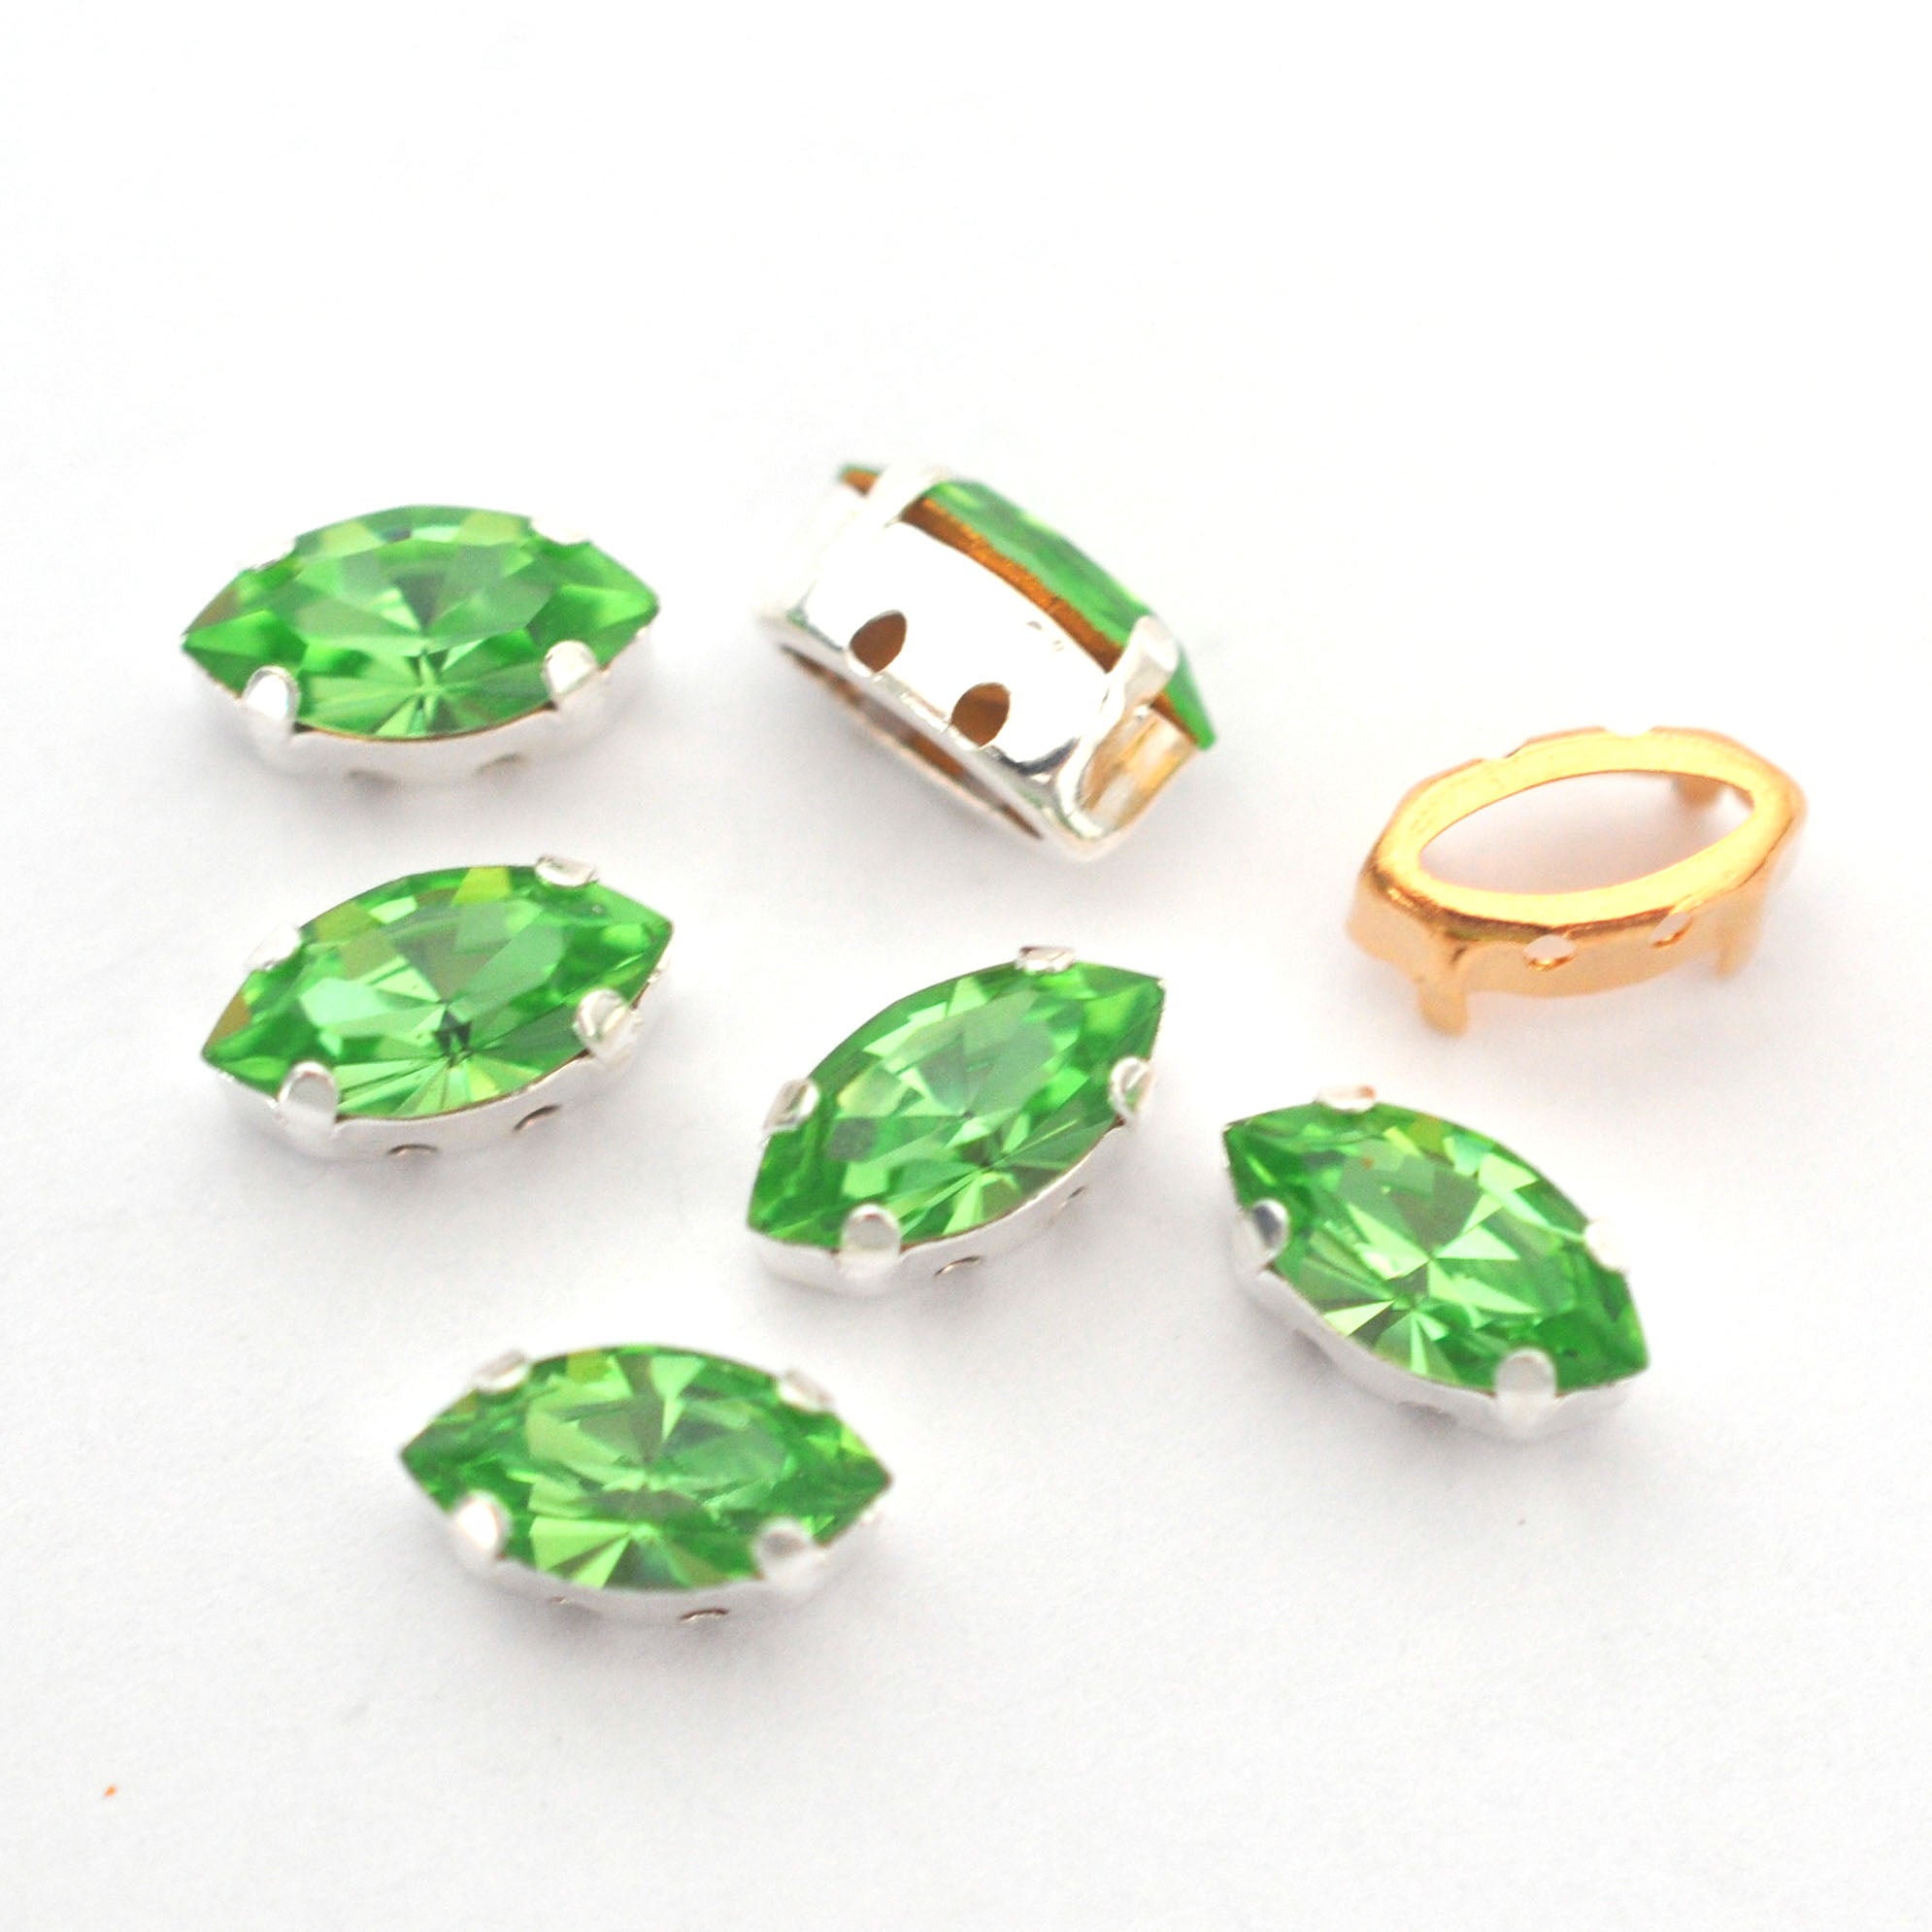 Peridot 10x5mm Navette Sew On Crystals - 6 Pieces